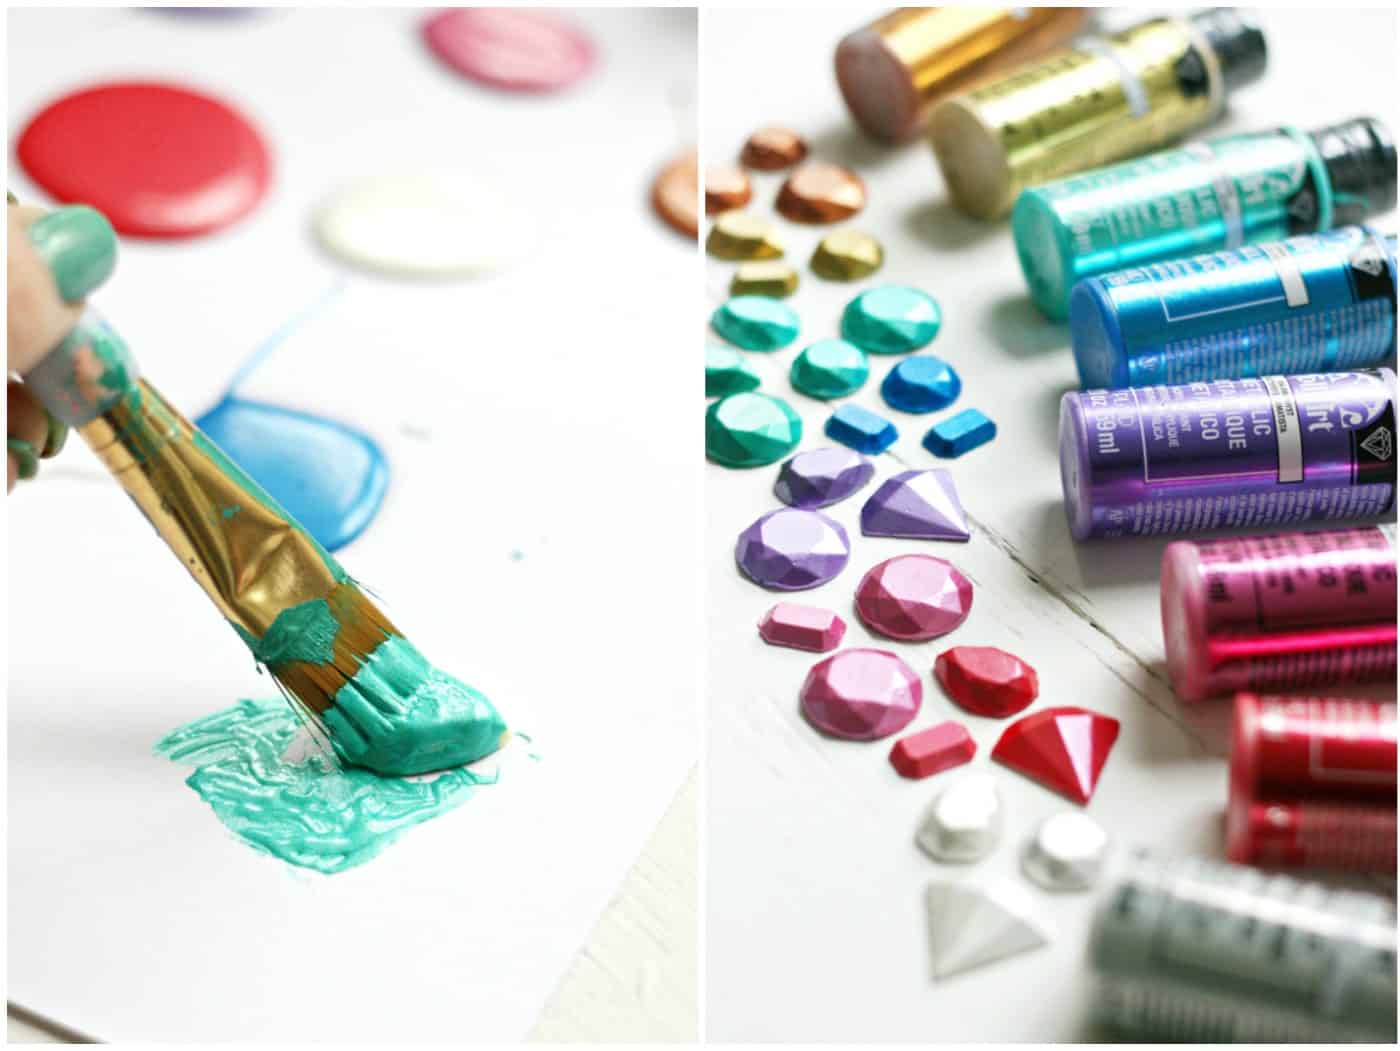 Painting hot glue gems with metallic acrylic paint